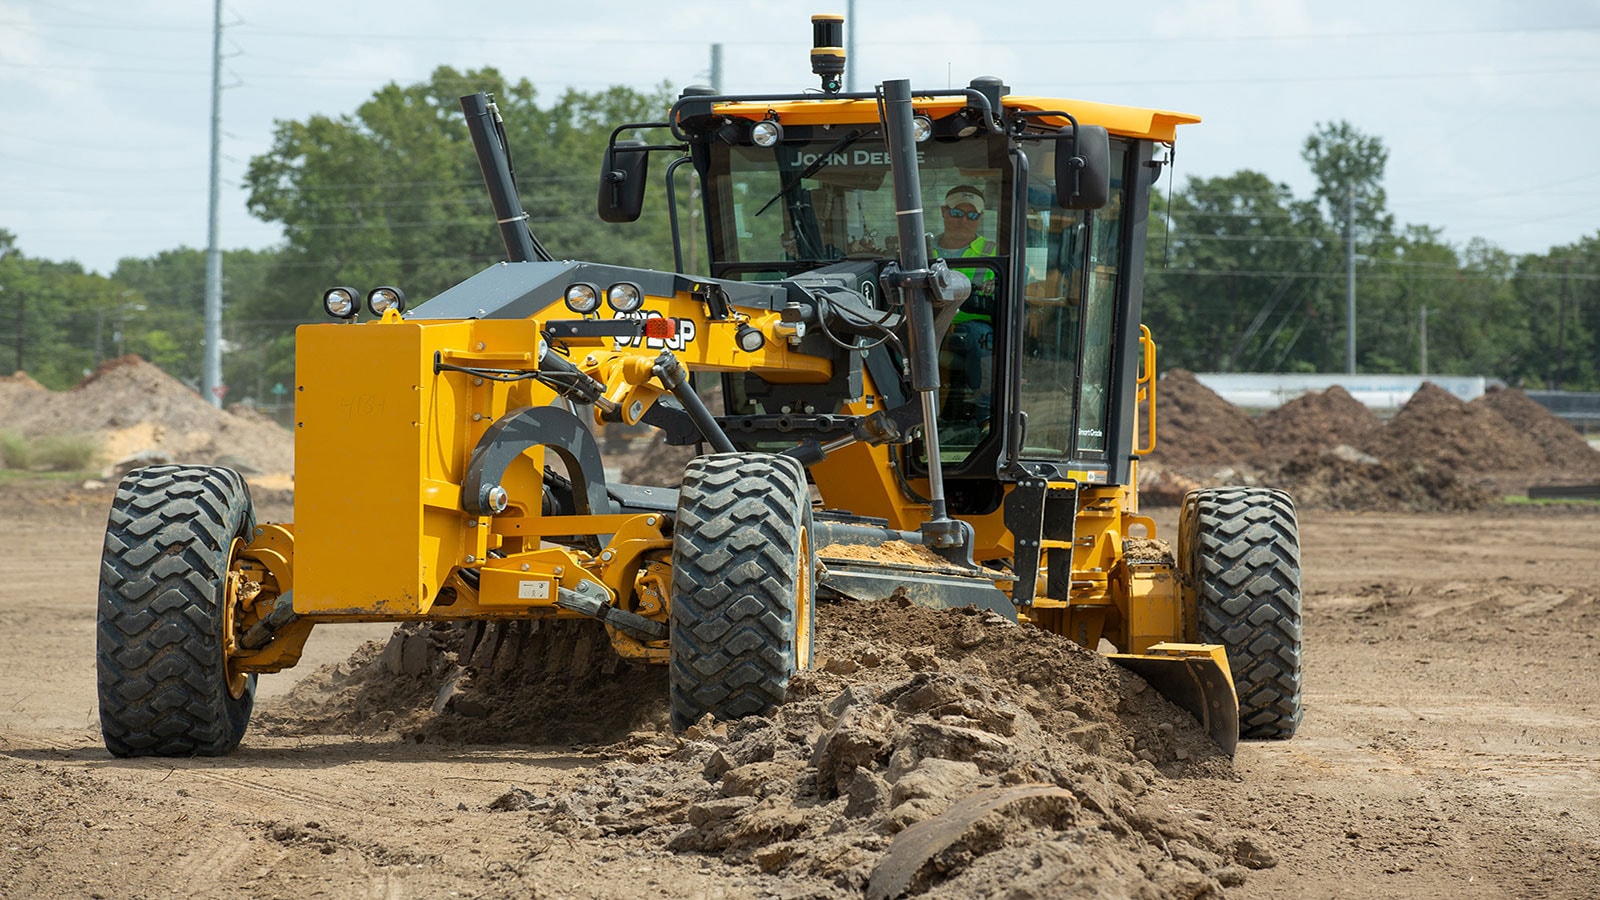 Griffin Contracting operates a motor grader on a job site.